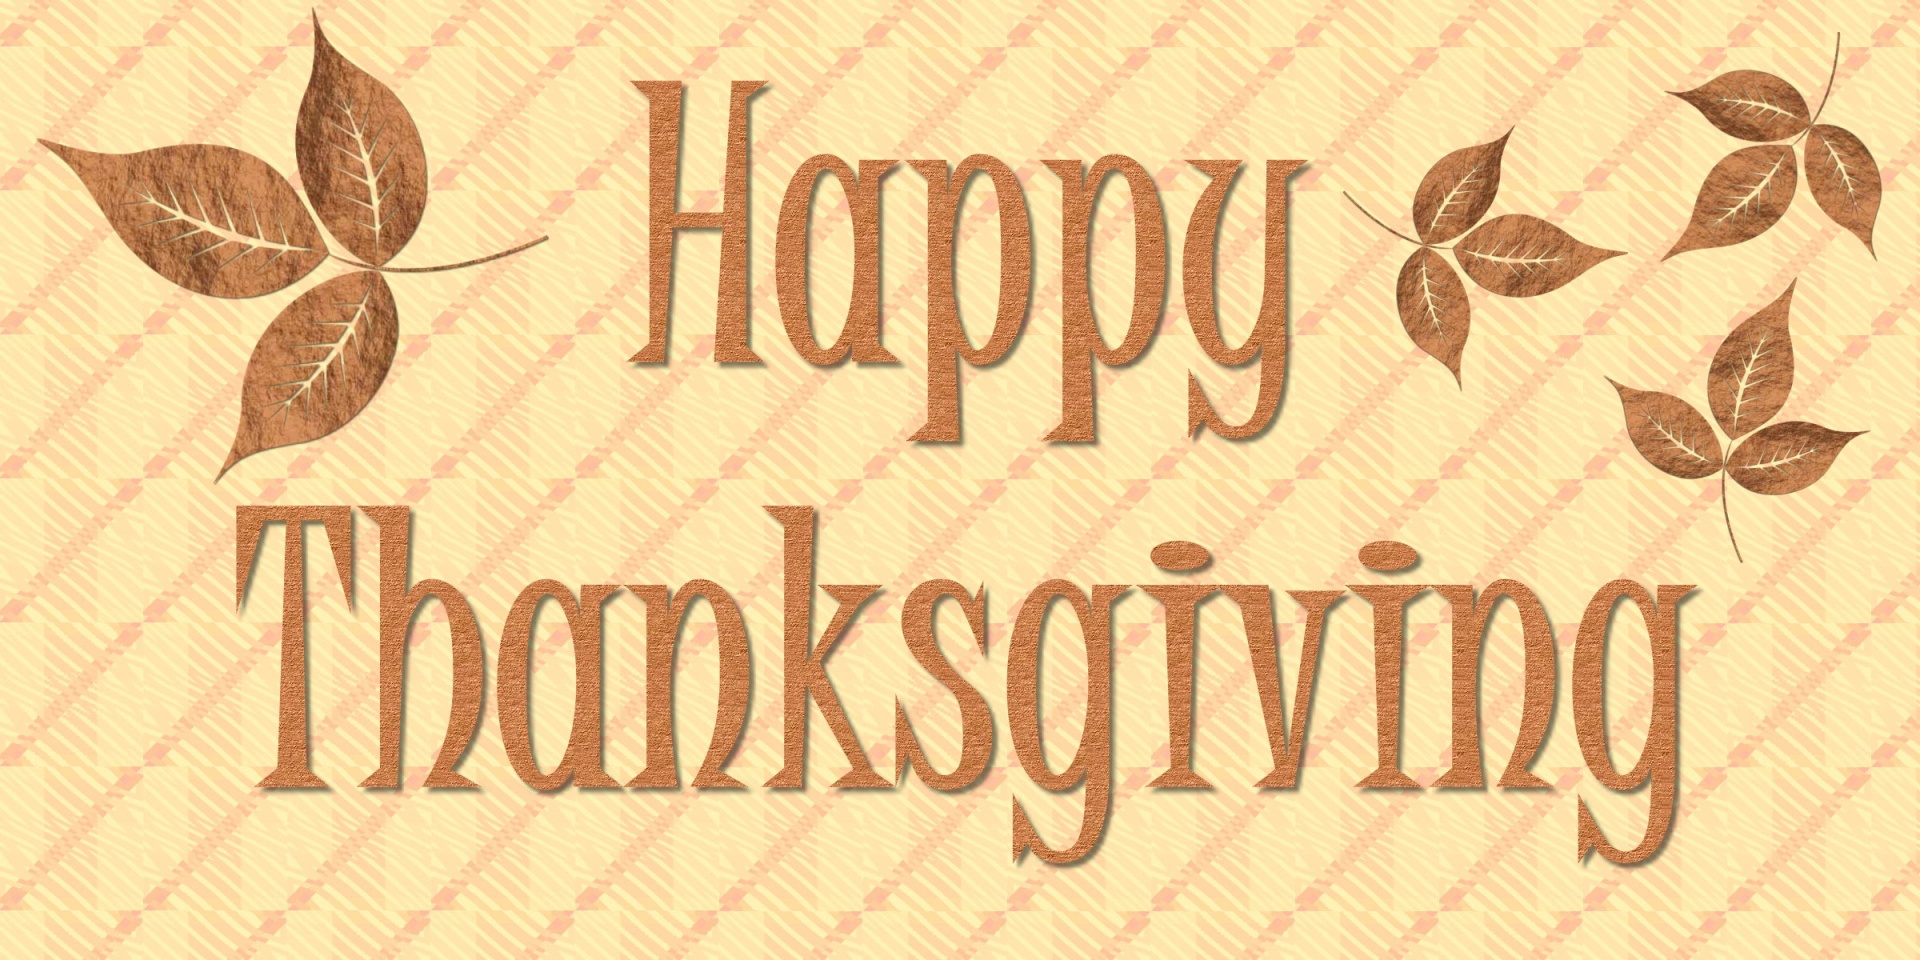 WordArt with the words Happy Thanksgiving stylized brown on a yellow background for scrapbooking or others